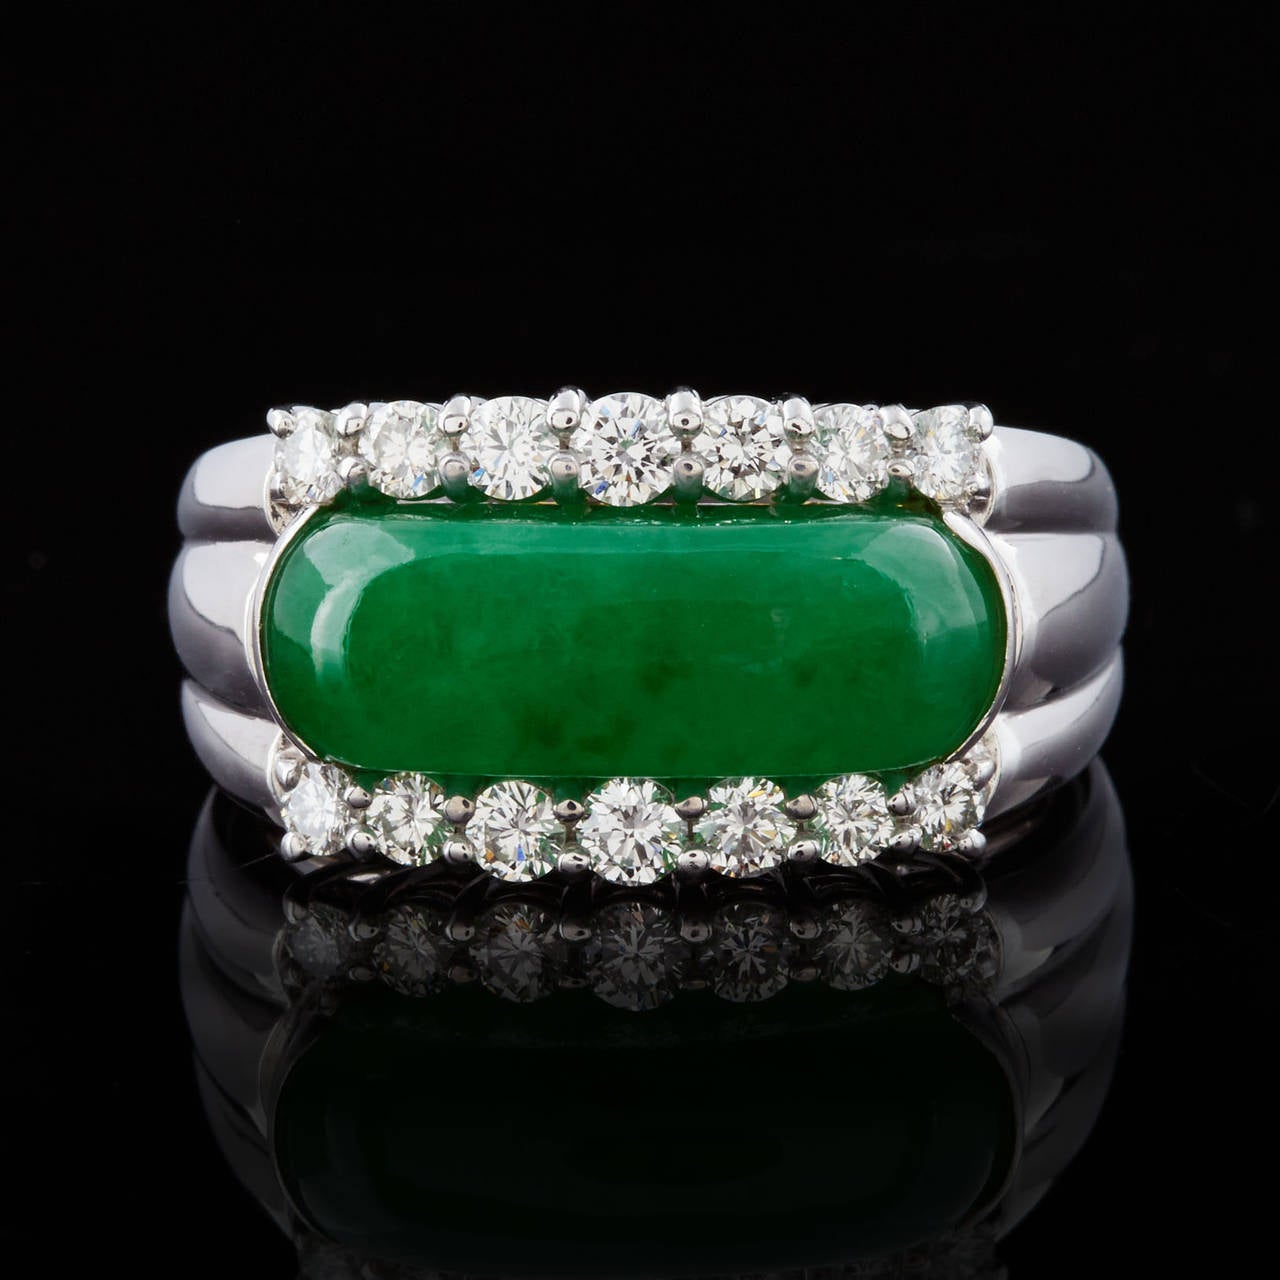 18Kt White Gold Ring Features an Oval Arc Shape Cabochon GIA Graded Translucent Green Jadeite Jade with Natural Color and No Indications of Impregnation. Along the top and bottom of the stone are a total of 14 fine diamonds with 0.56 approximate